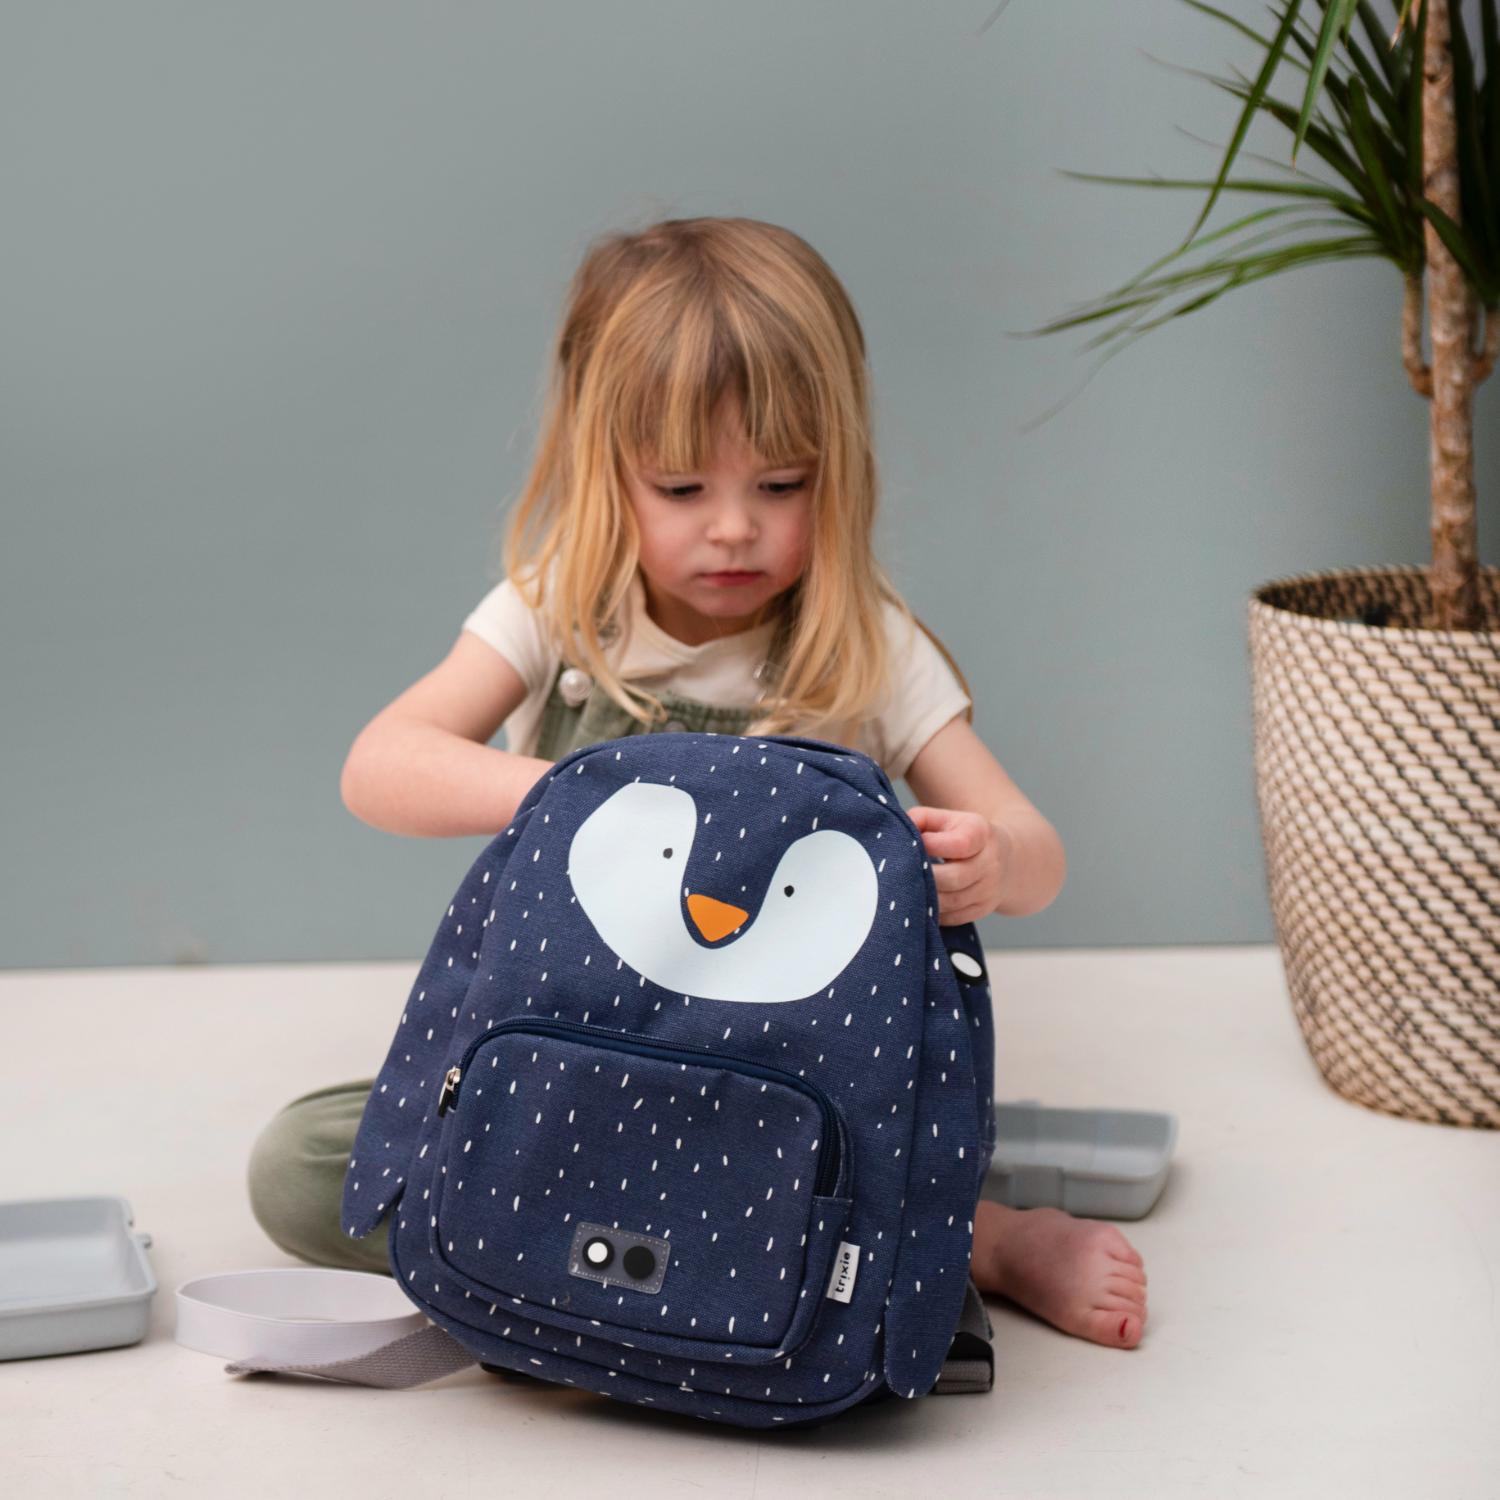 Trixie Mr. Penguin Backpack | Kid’s Backpack for Creche, Nursery & School | Lifestyle: Girl Packing Backpack | BeoVERDE.ie